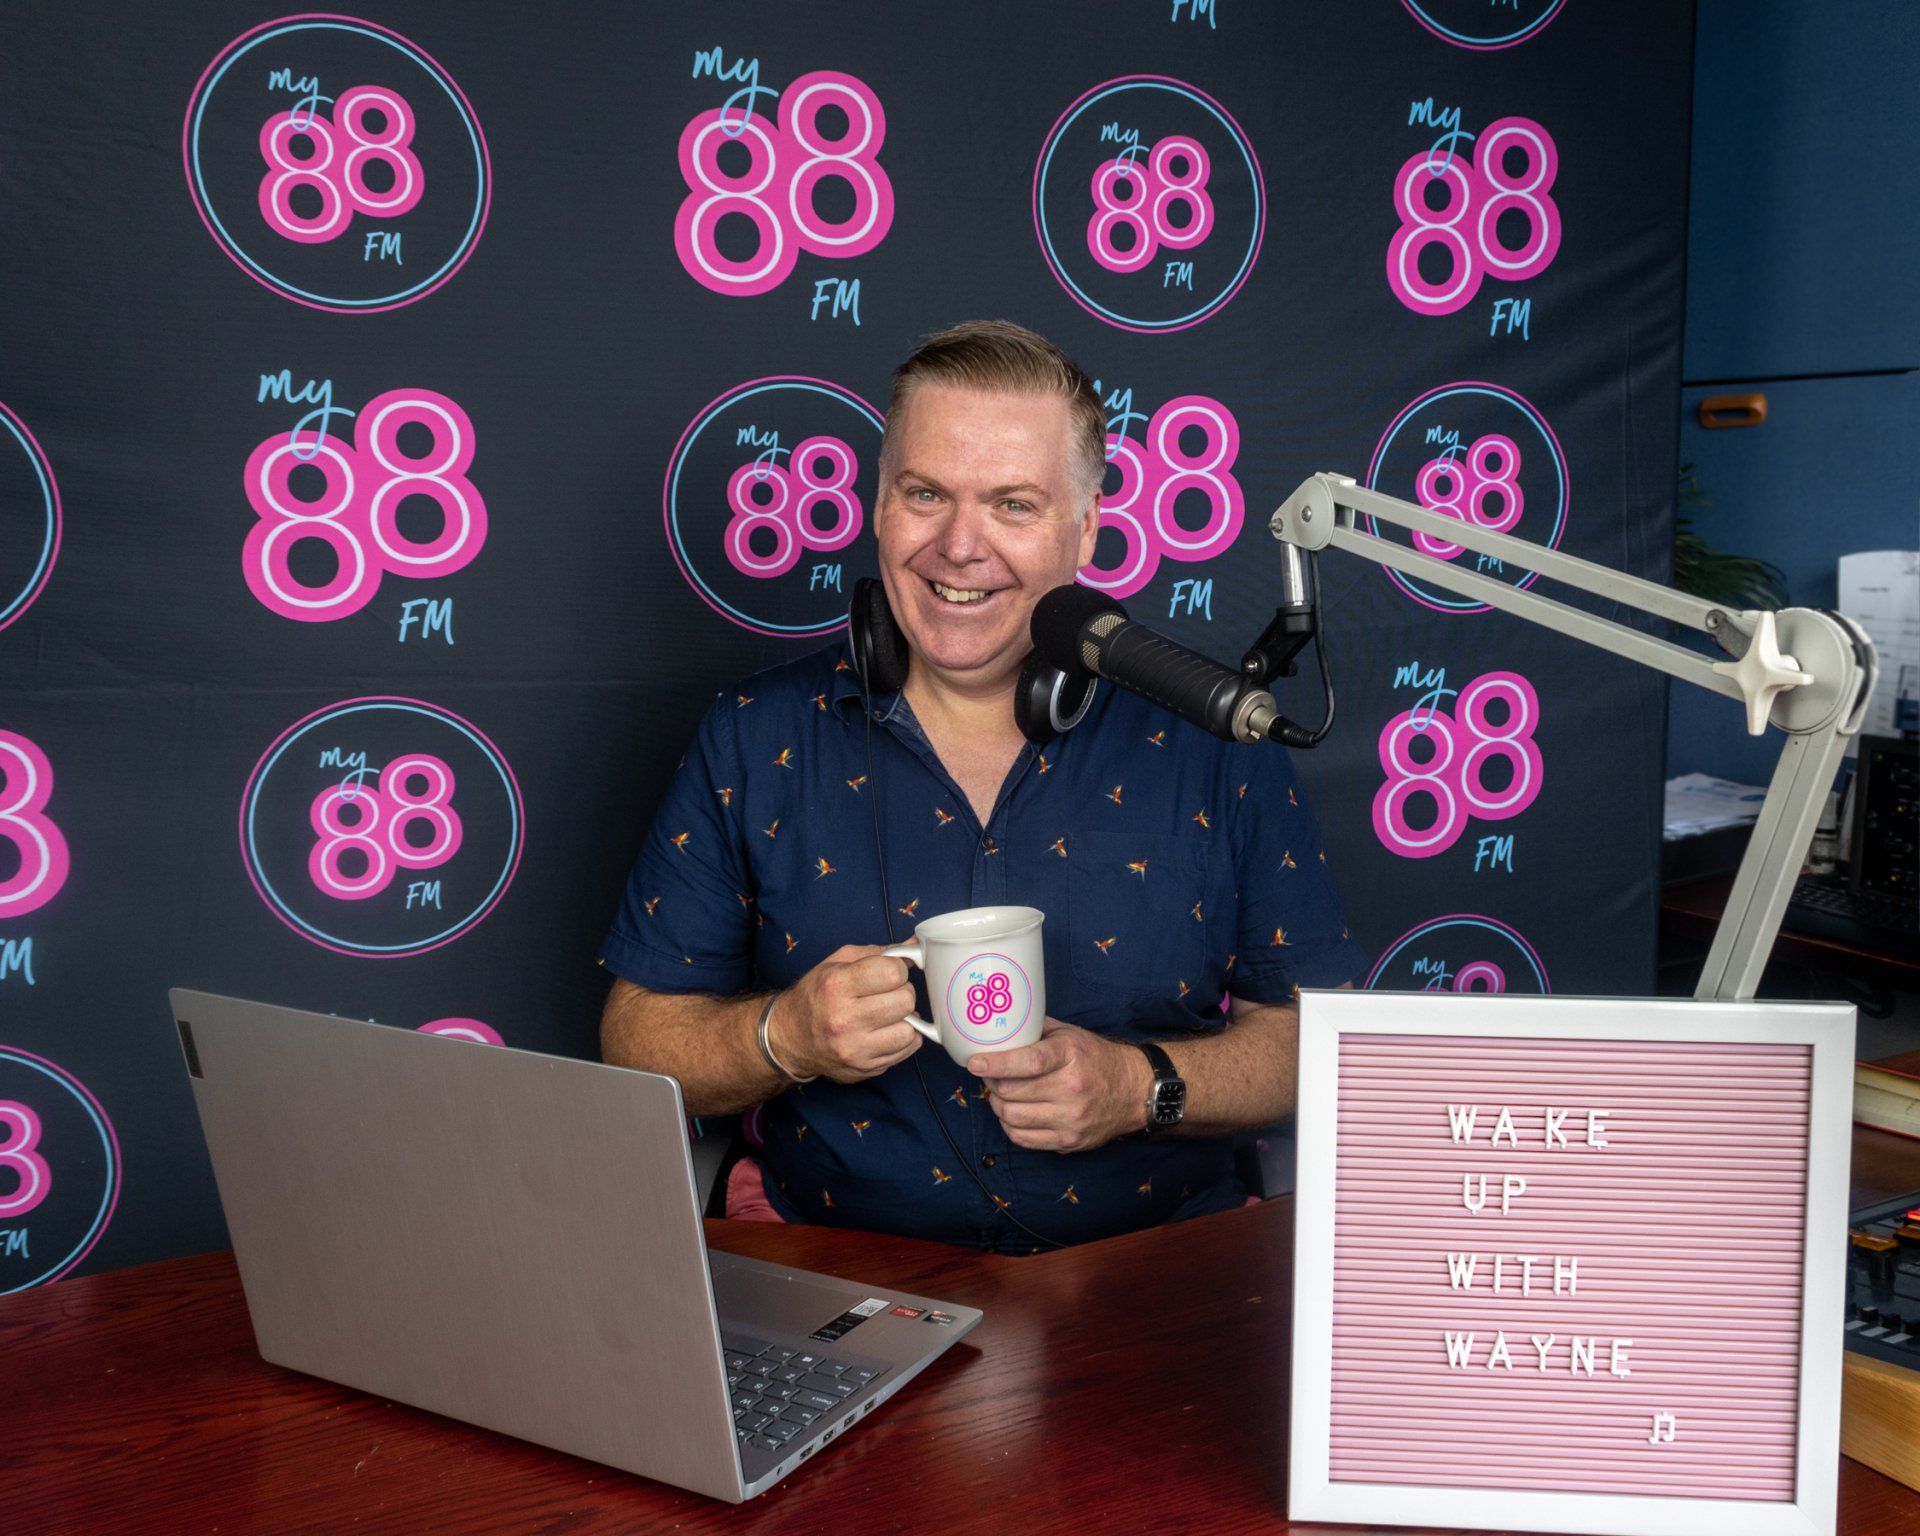 Getting to Know Wayne Tunks, Breakfast announcer on My88 FM Your home of the eighties!